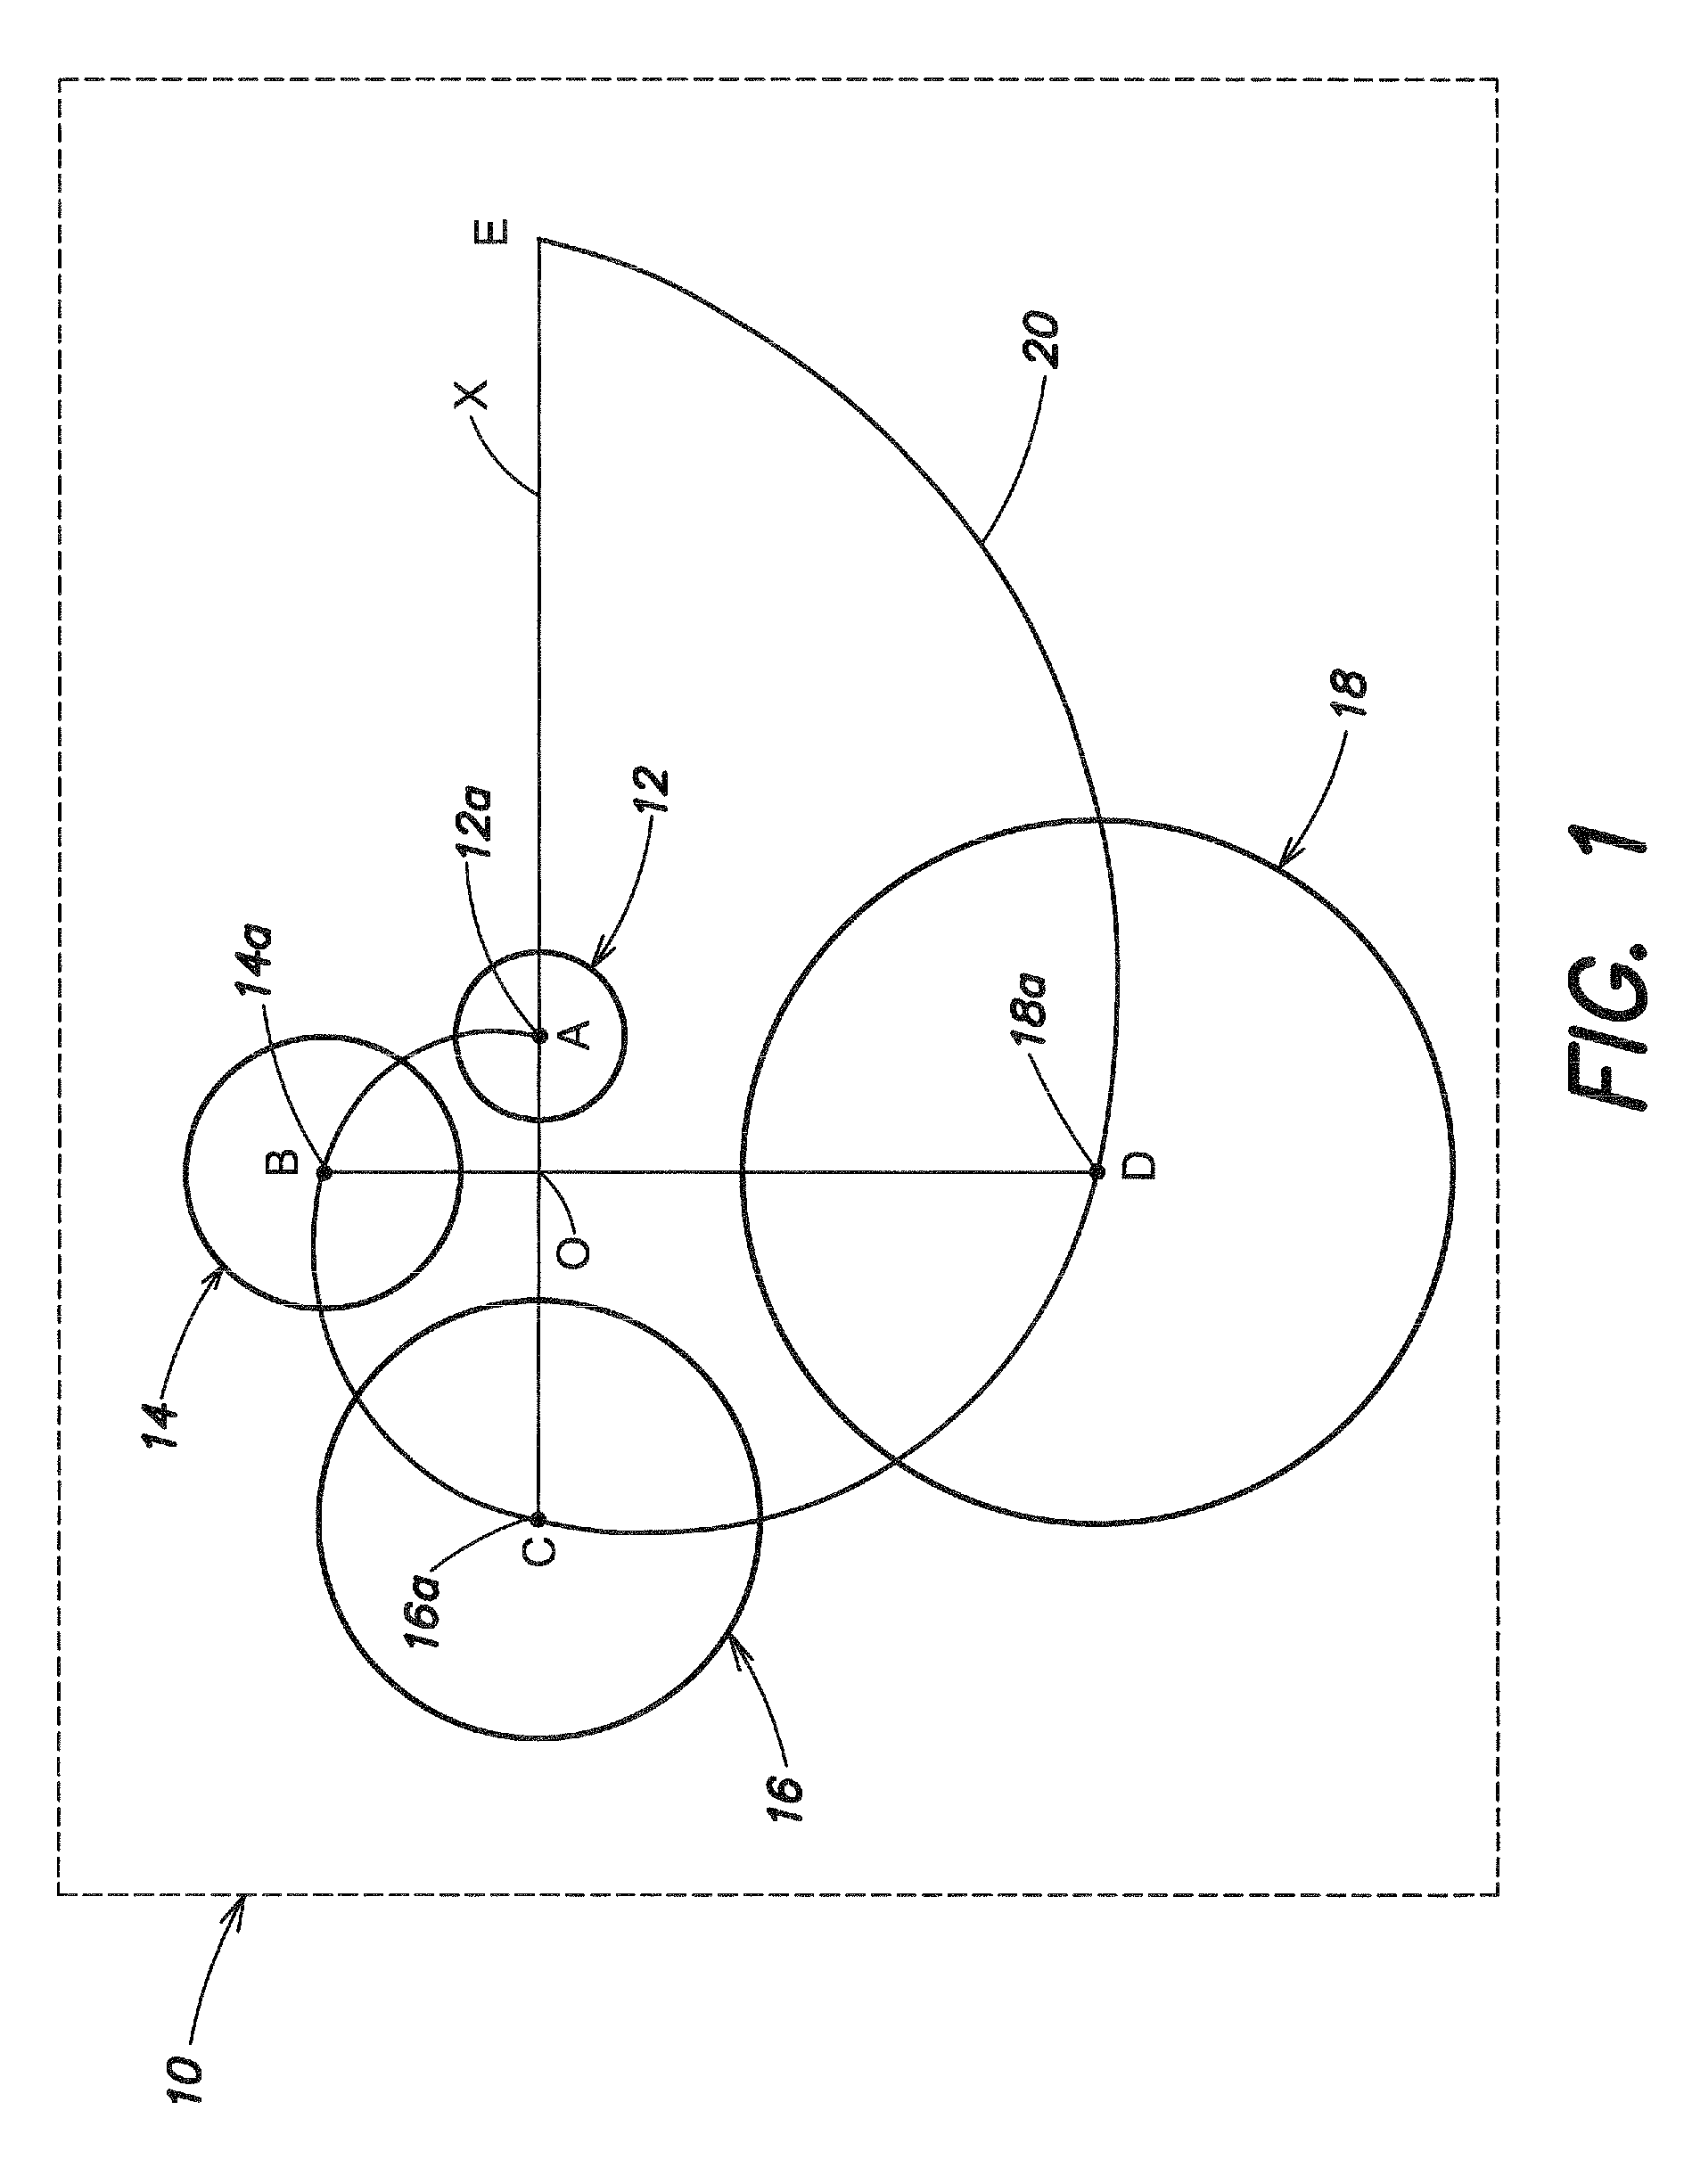 Sound reproduction systems and method for arranging transducers therein